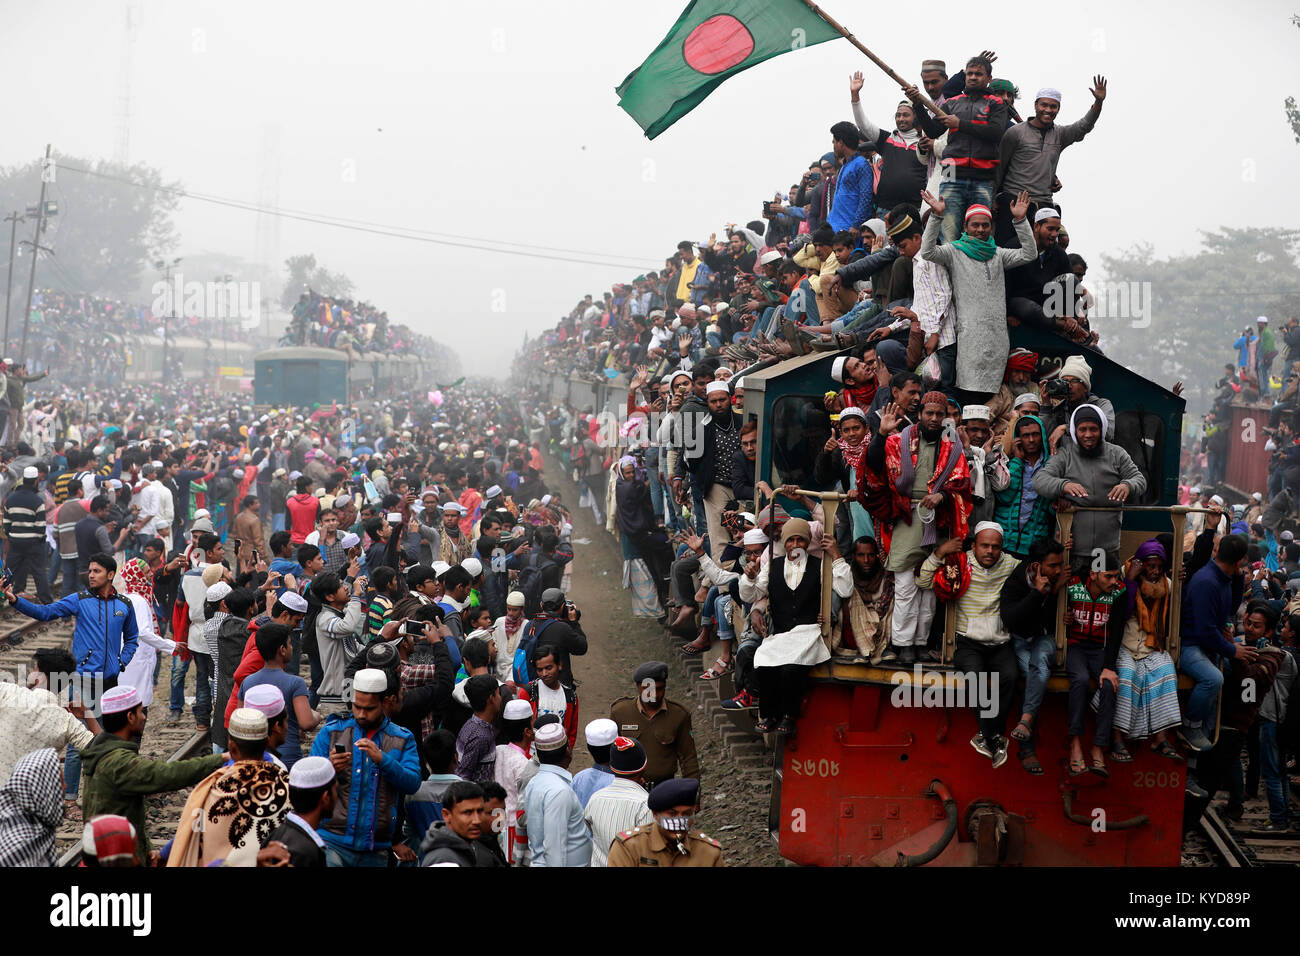 Dhaka, Bangladesh. 14th Jan, 2018.  Bangladeshi Muslim devotees return home in an over-crowded train after attends the Akheri Munajat or the Final Prayer on the last day of Biswa Ijtema, the second largest World Congregation of Muslims at Tongi, on the outskirts of Dhaka, Bangladesh. The first phase of Biswa Ijtema ends today with Akheri Munajat, or the Final Prayer, and Muslim devotees from across the world participated in the second largest world congregation of Muslims. Credit: SK Hasan Ali/Alamy Live News Stock Photo